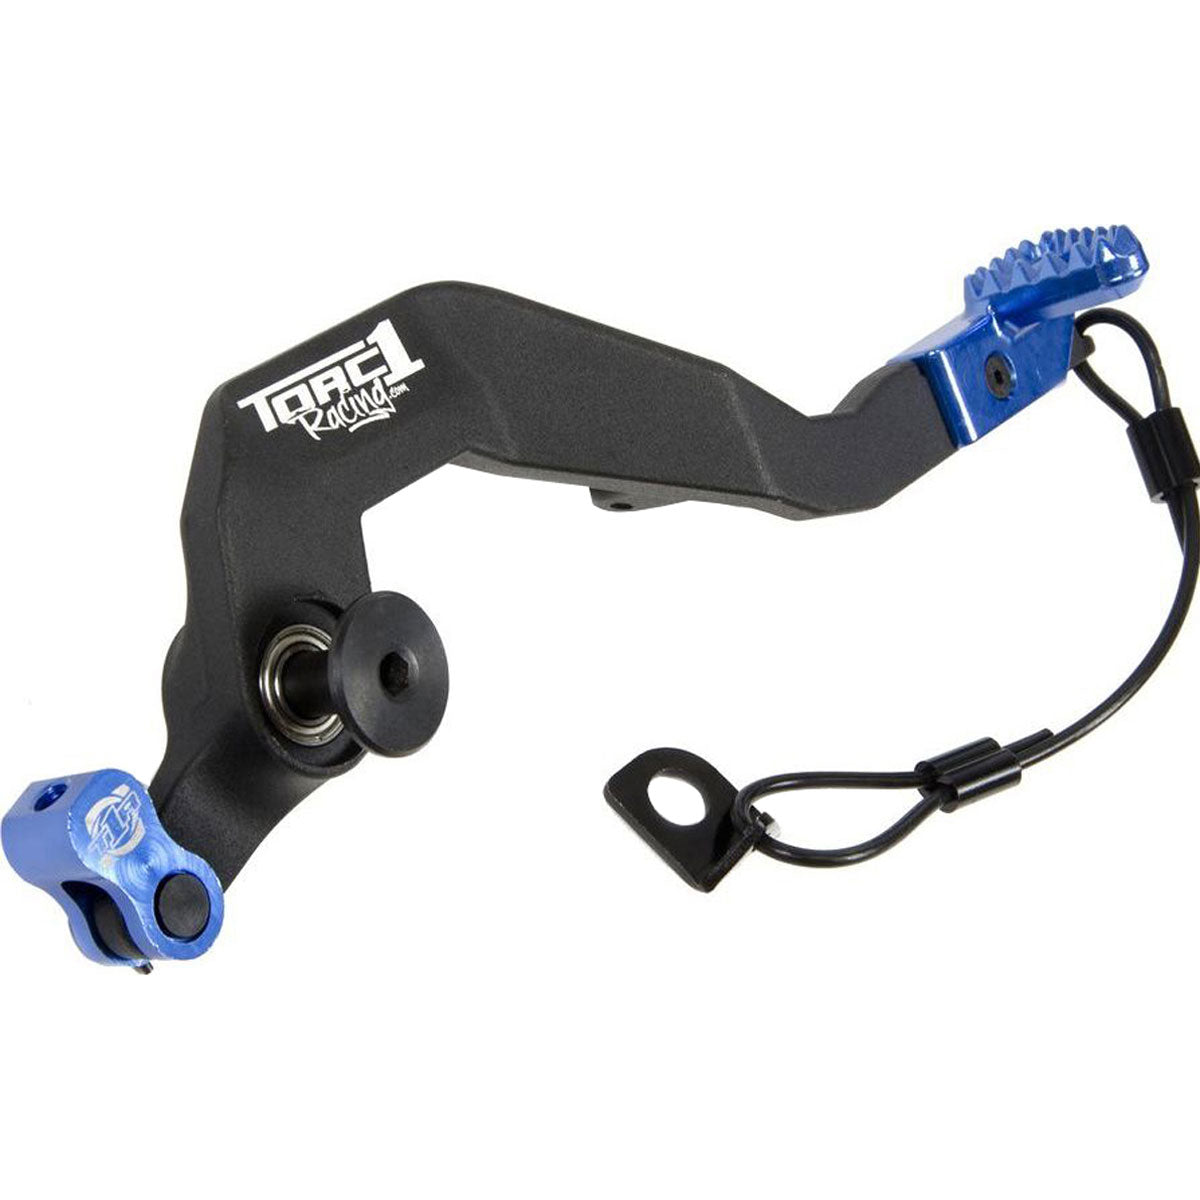 Torc1 Racing Yamaha Motion MX Motorcycle Off-Road Brake Pedal Accessories-111